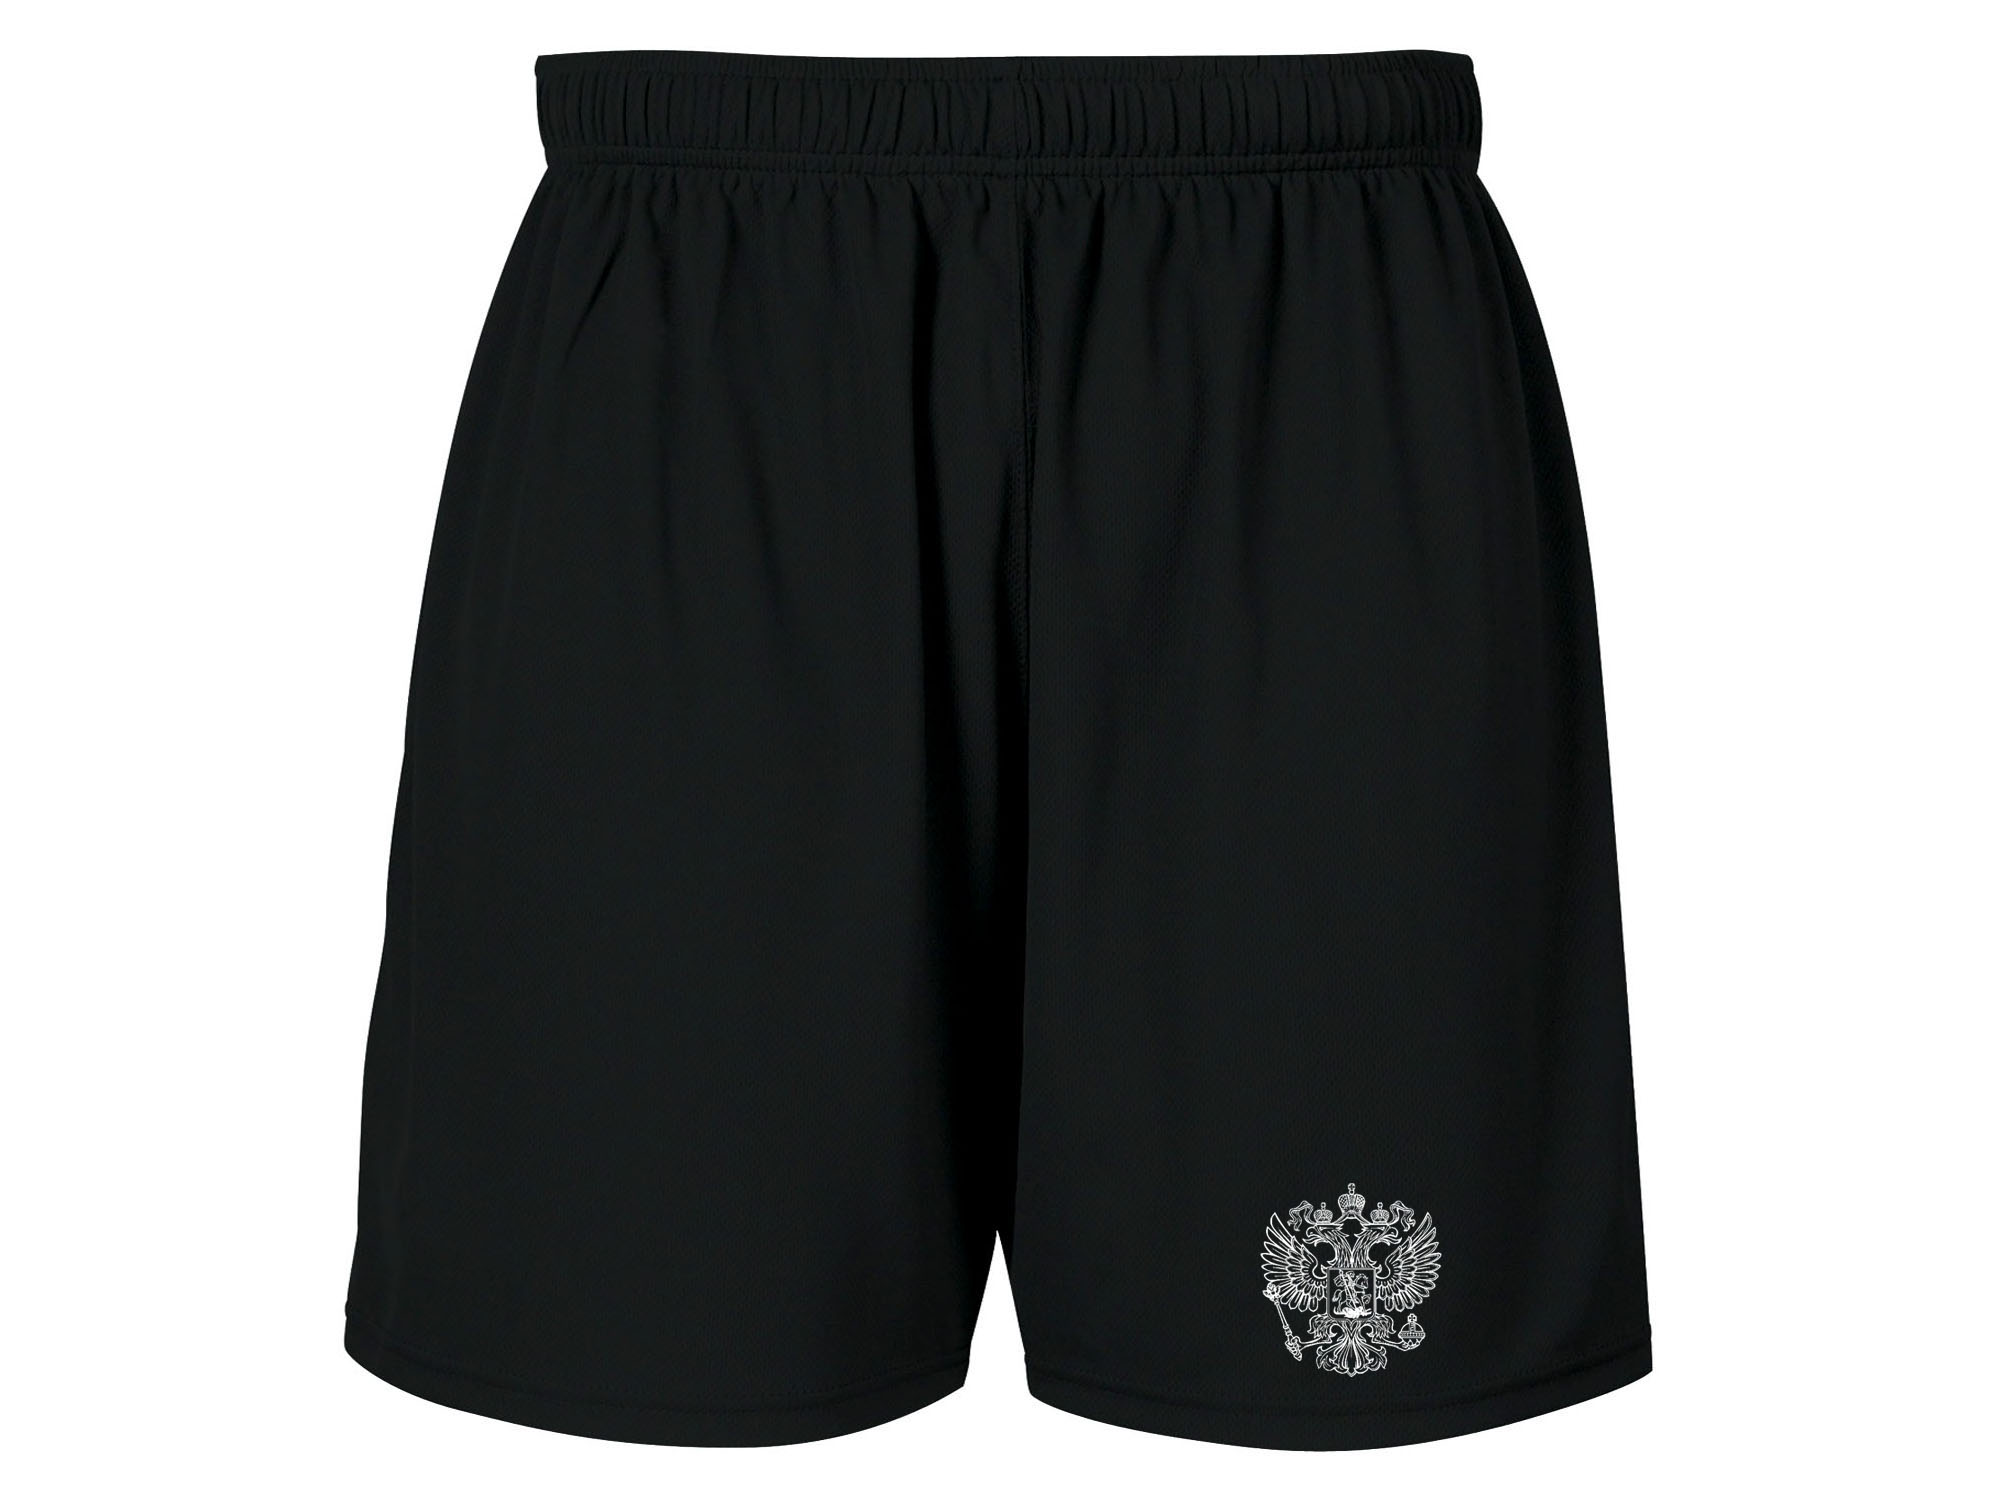 Russian coat of arms Two headed eagle shorts